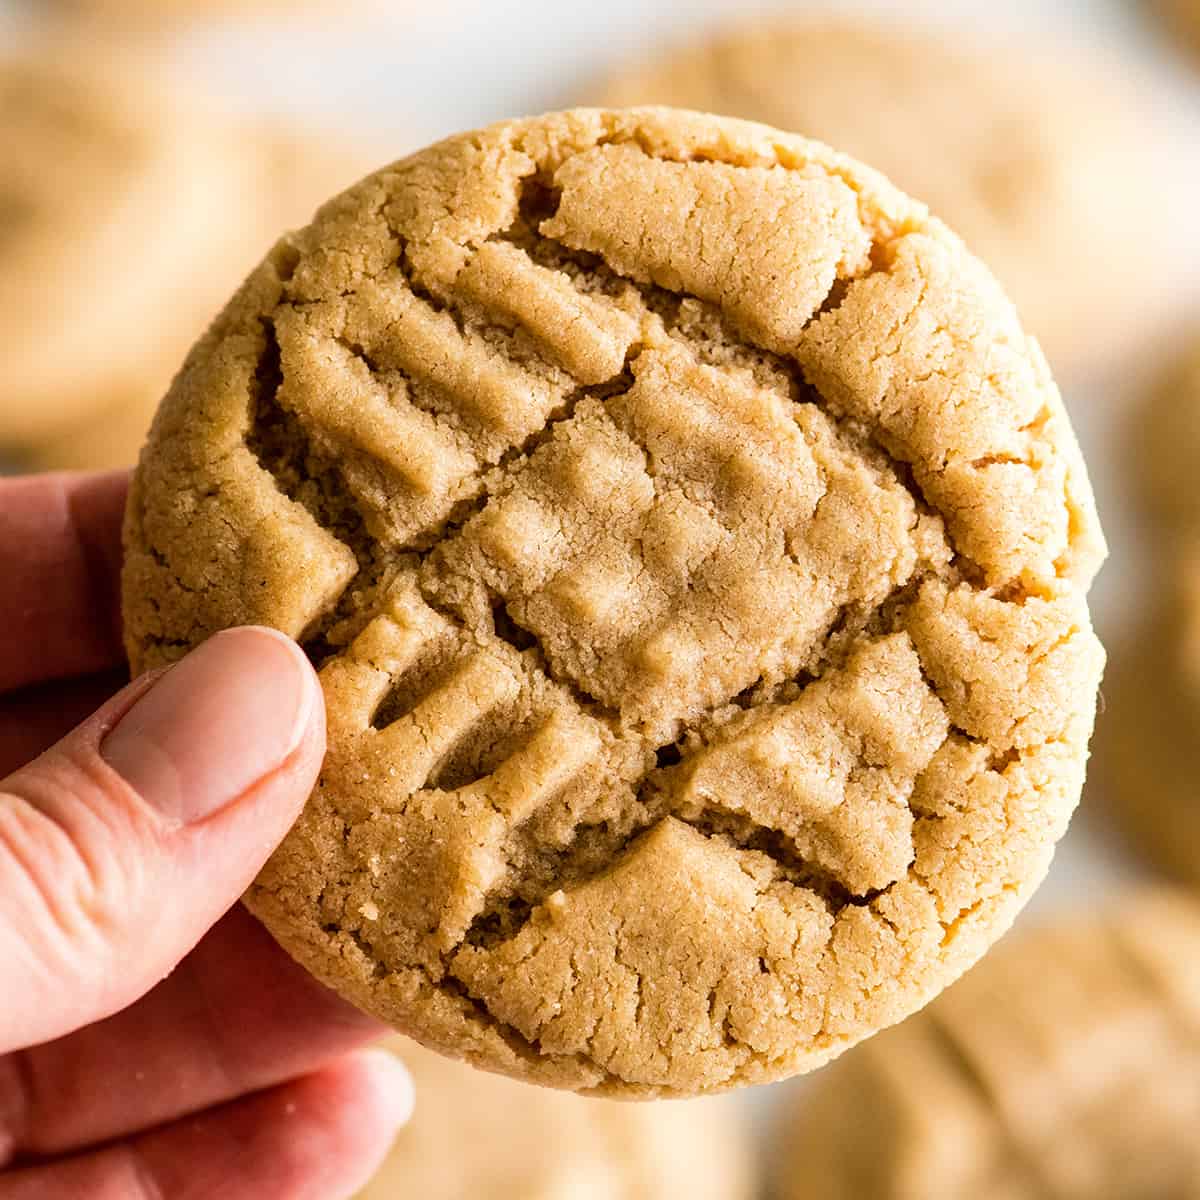 front view of a hand holding a peanut butter cookie